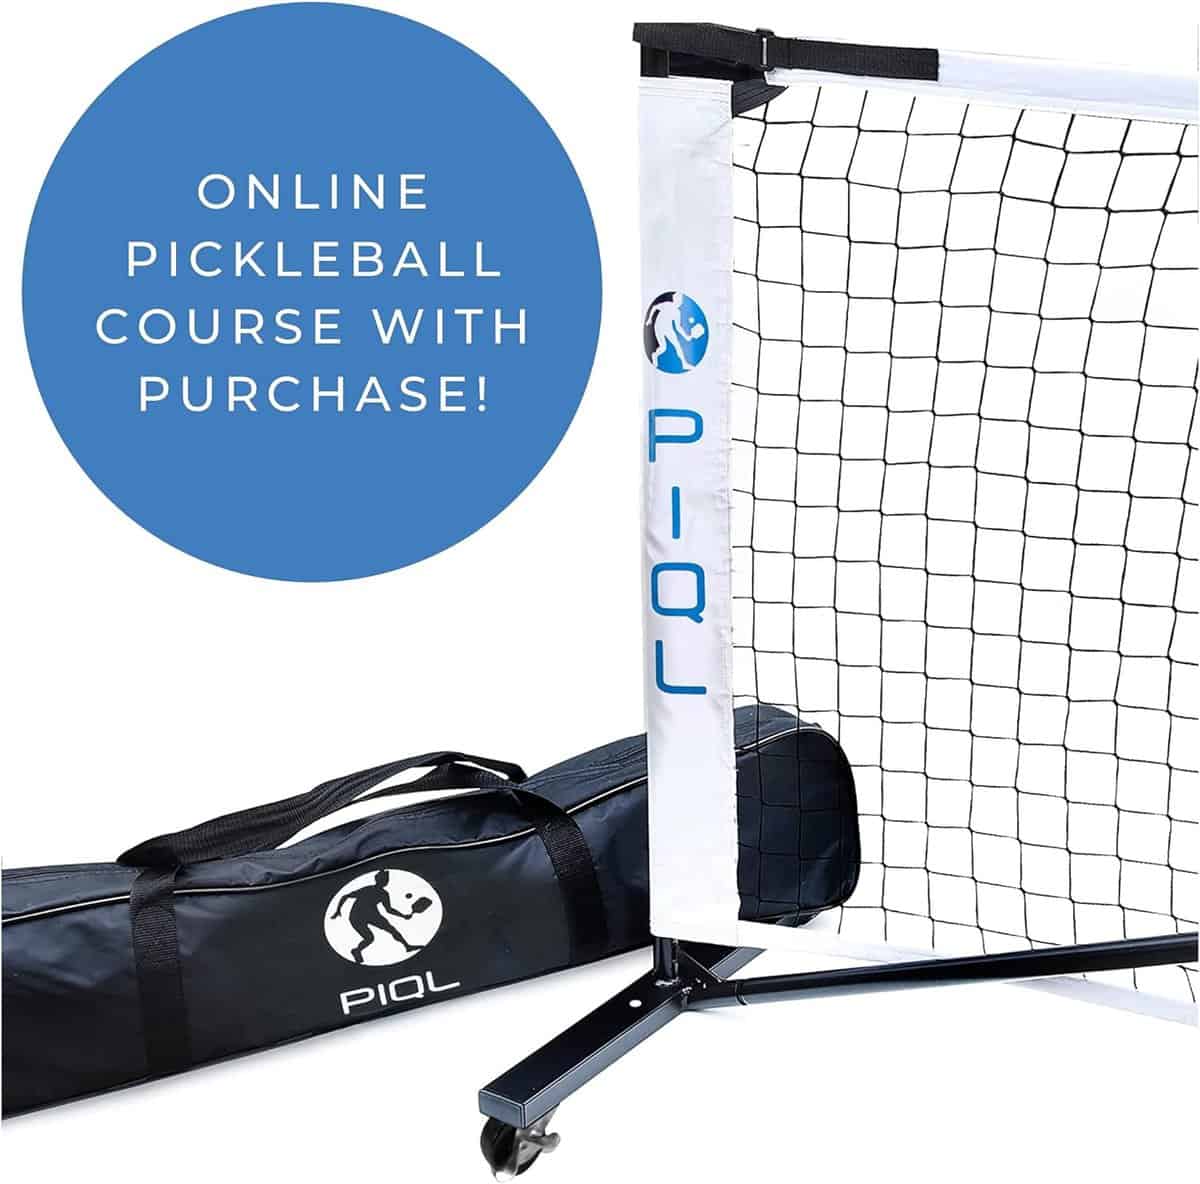 PIQL Portable Pickleball Net System with Wheels